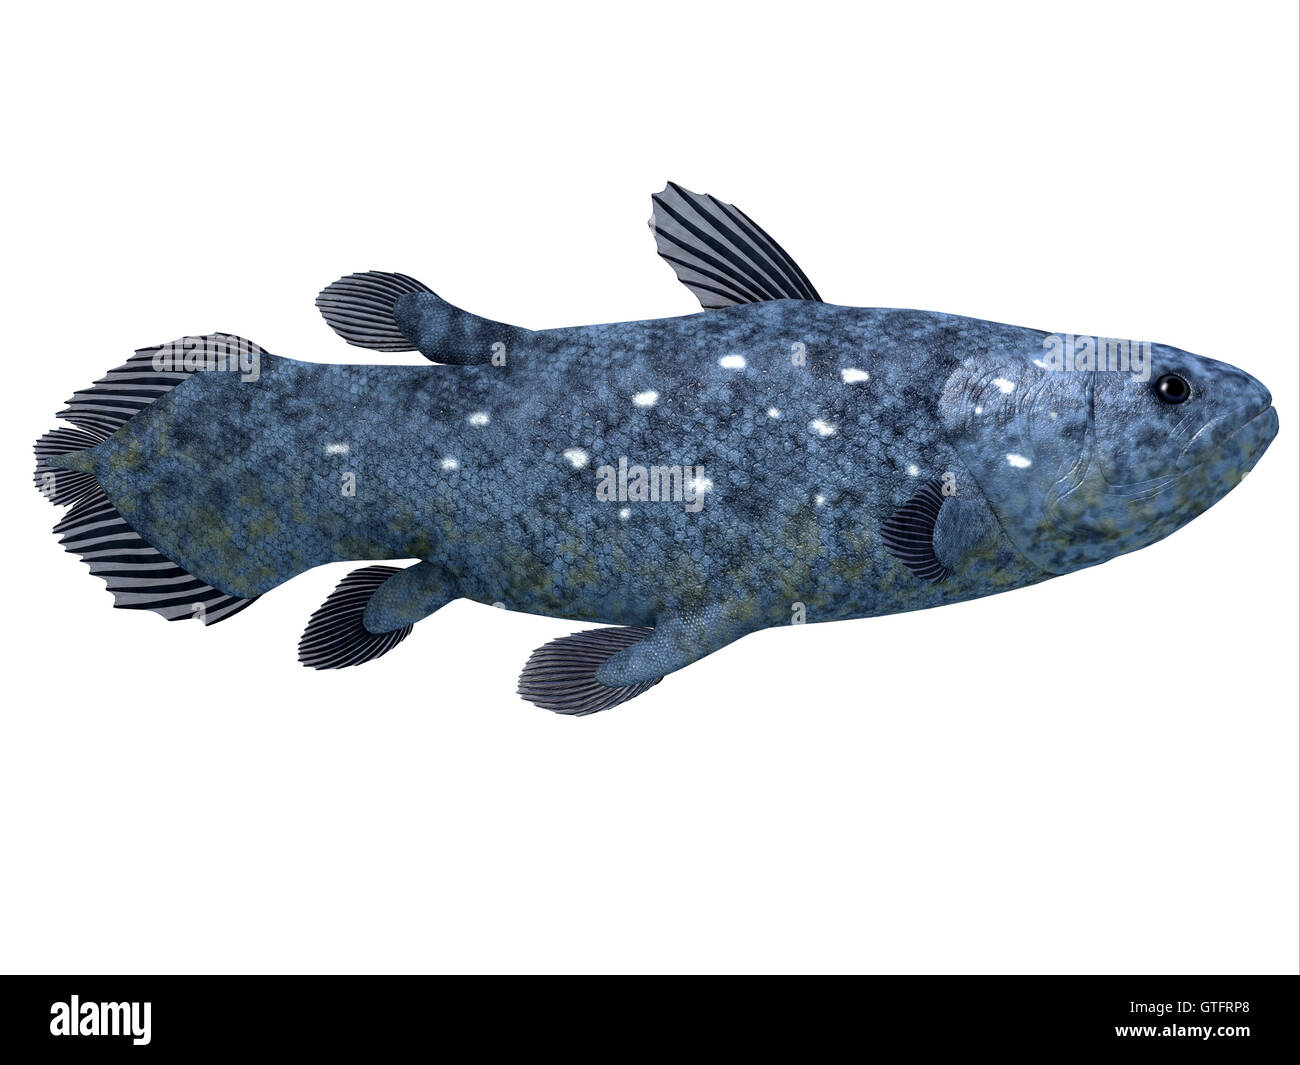 Coelacanth Fish on White Stock Photo